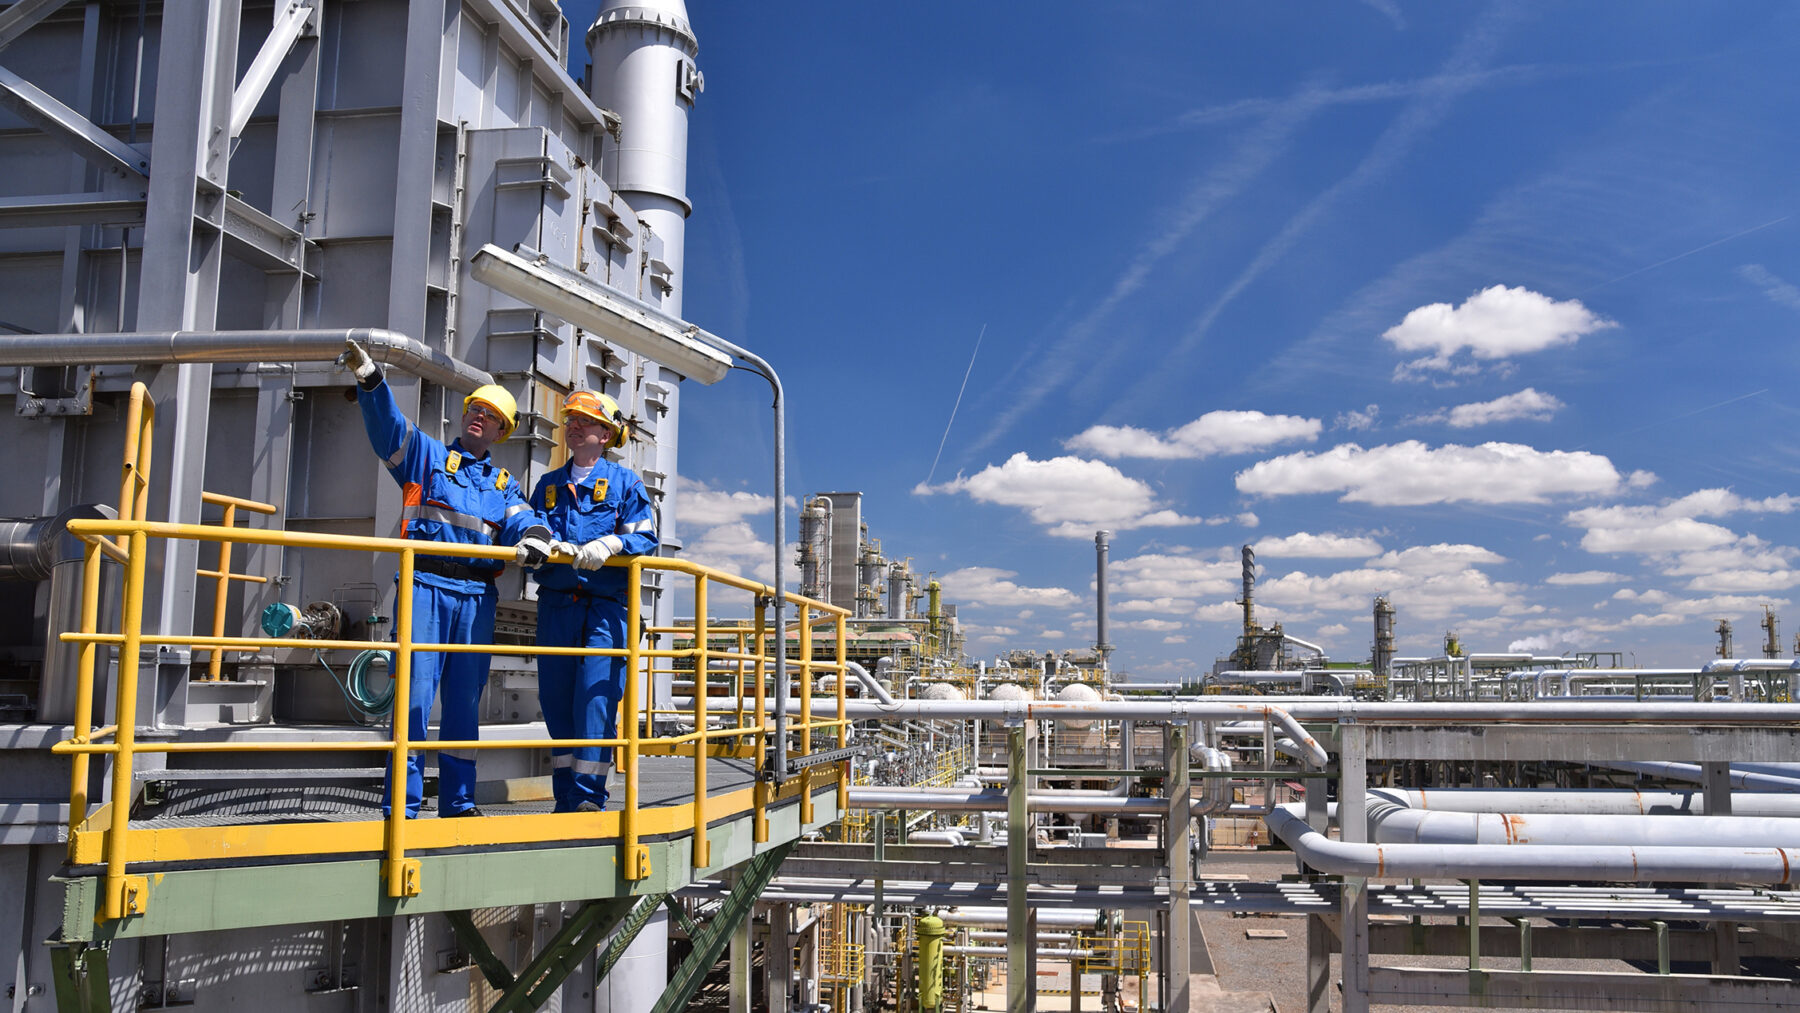 Two oil and gas workers stand on a platform overlooking the operations of the oil and gas refinery